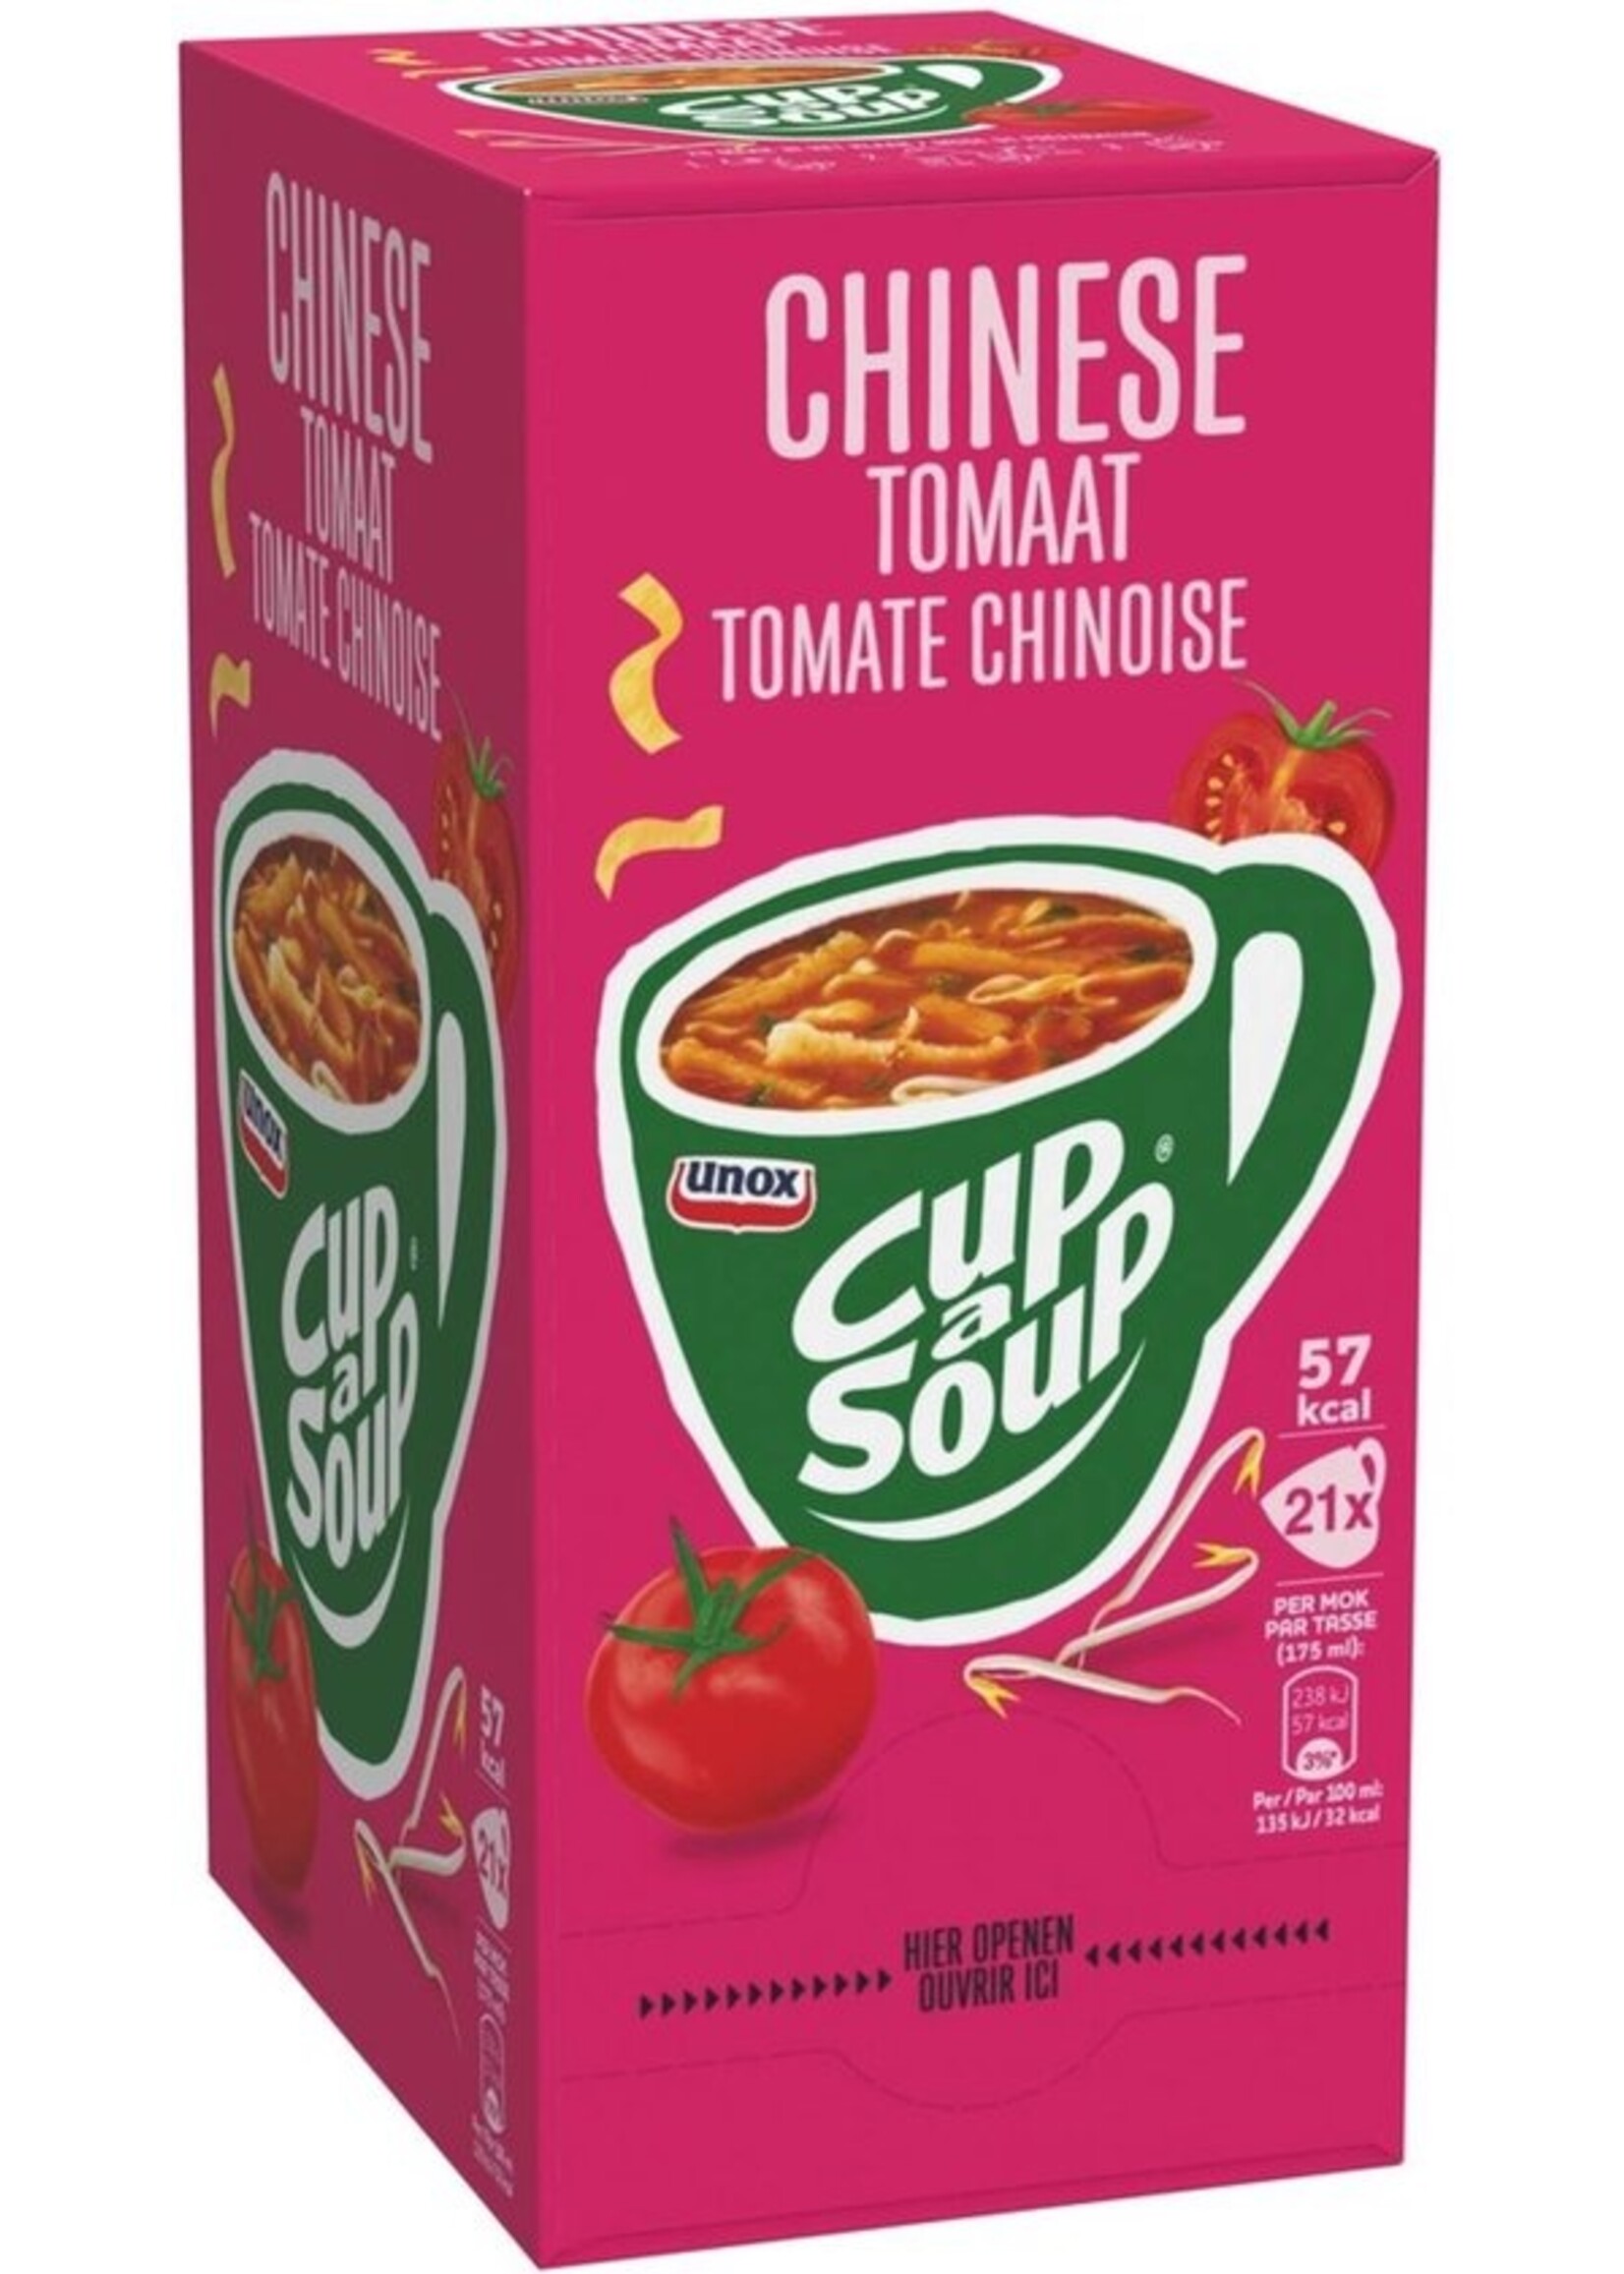 Unox Cup-a-soup Chinesische Tomate (21 x 175ml)